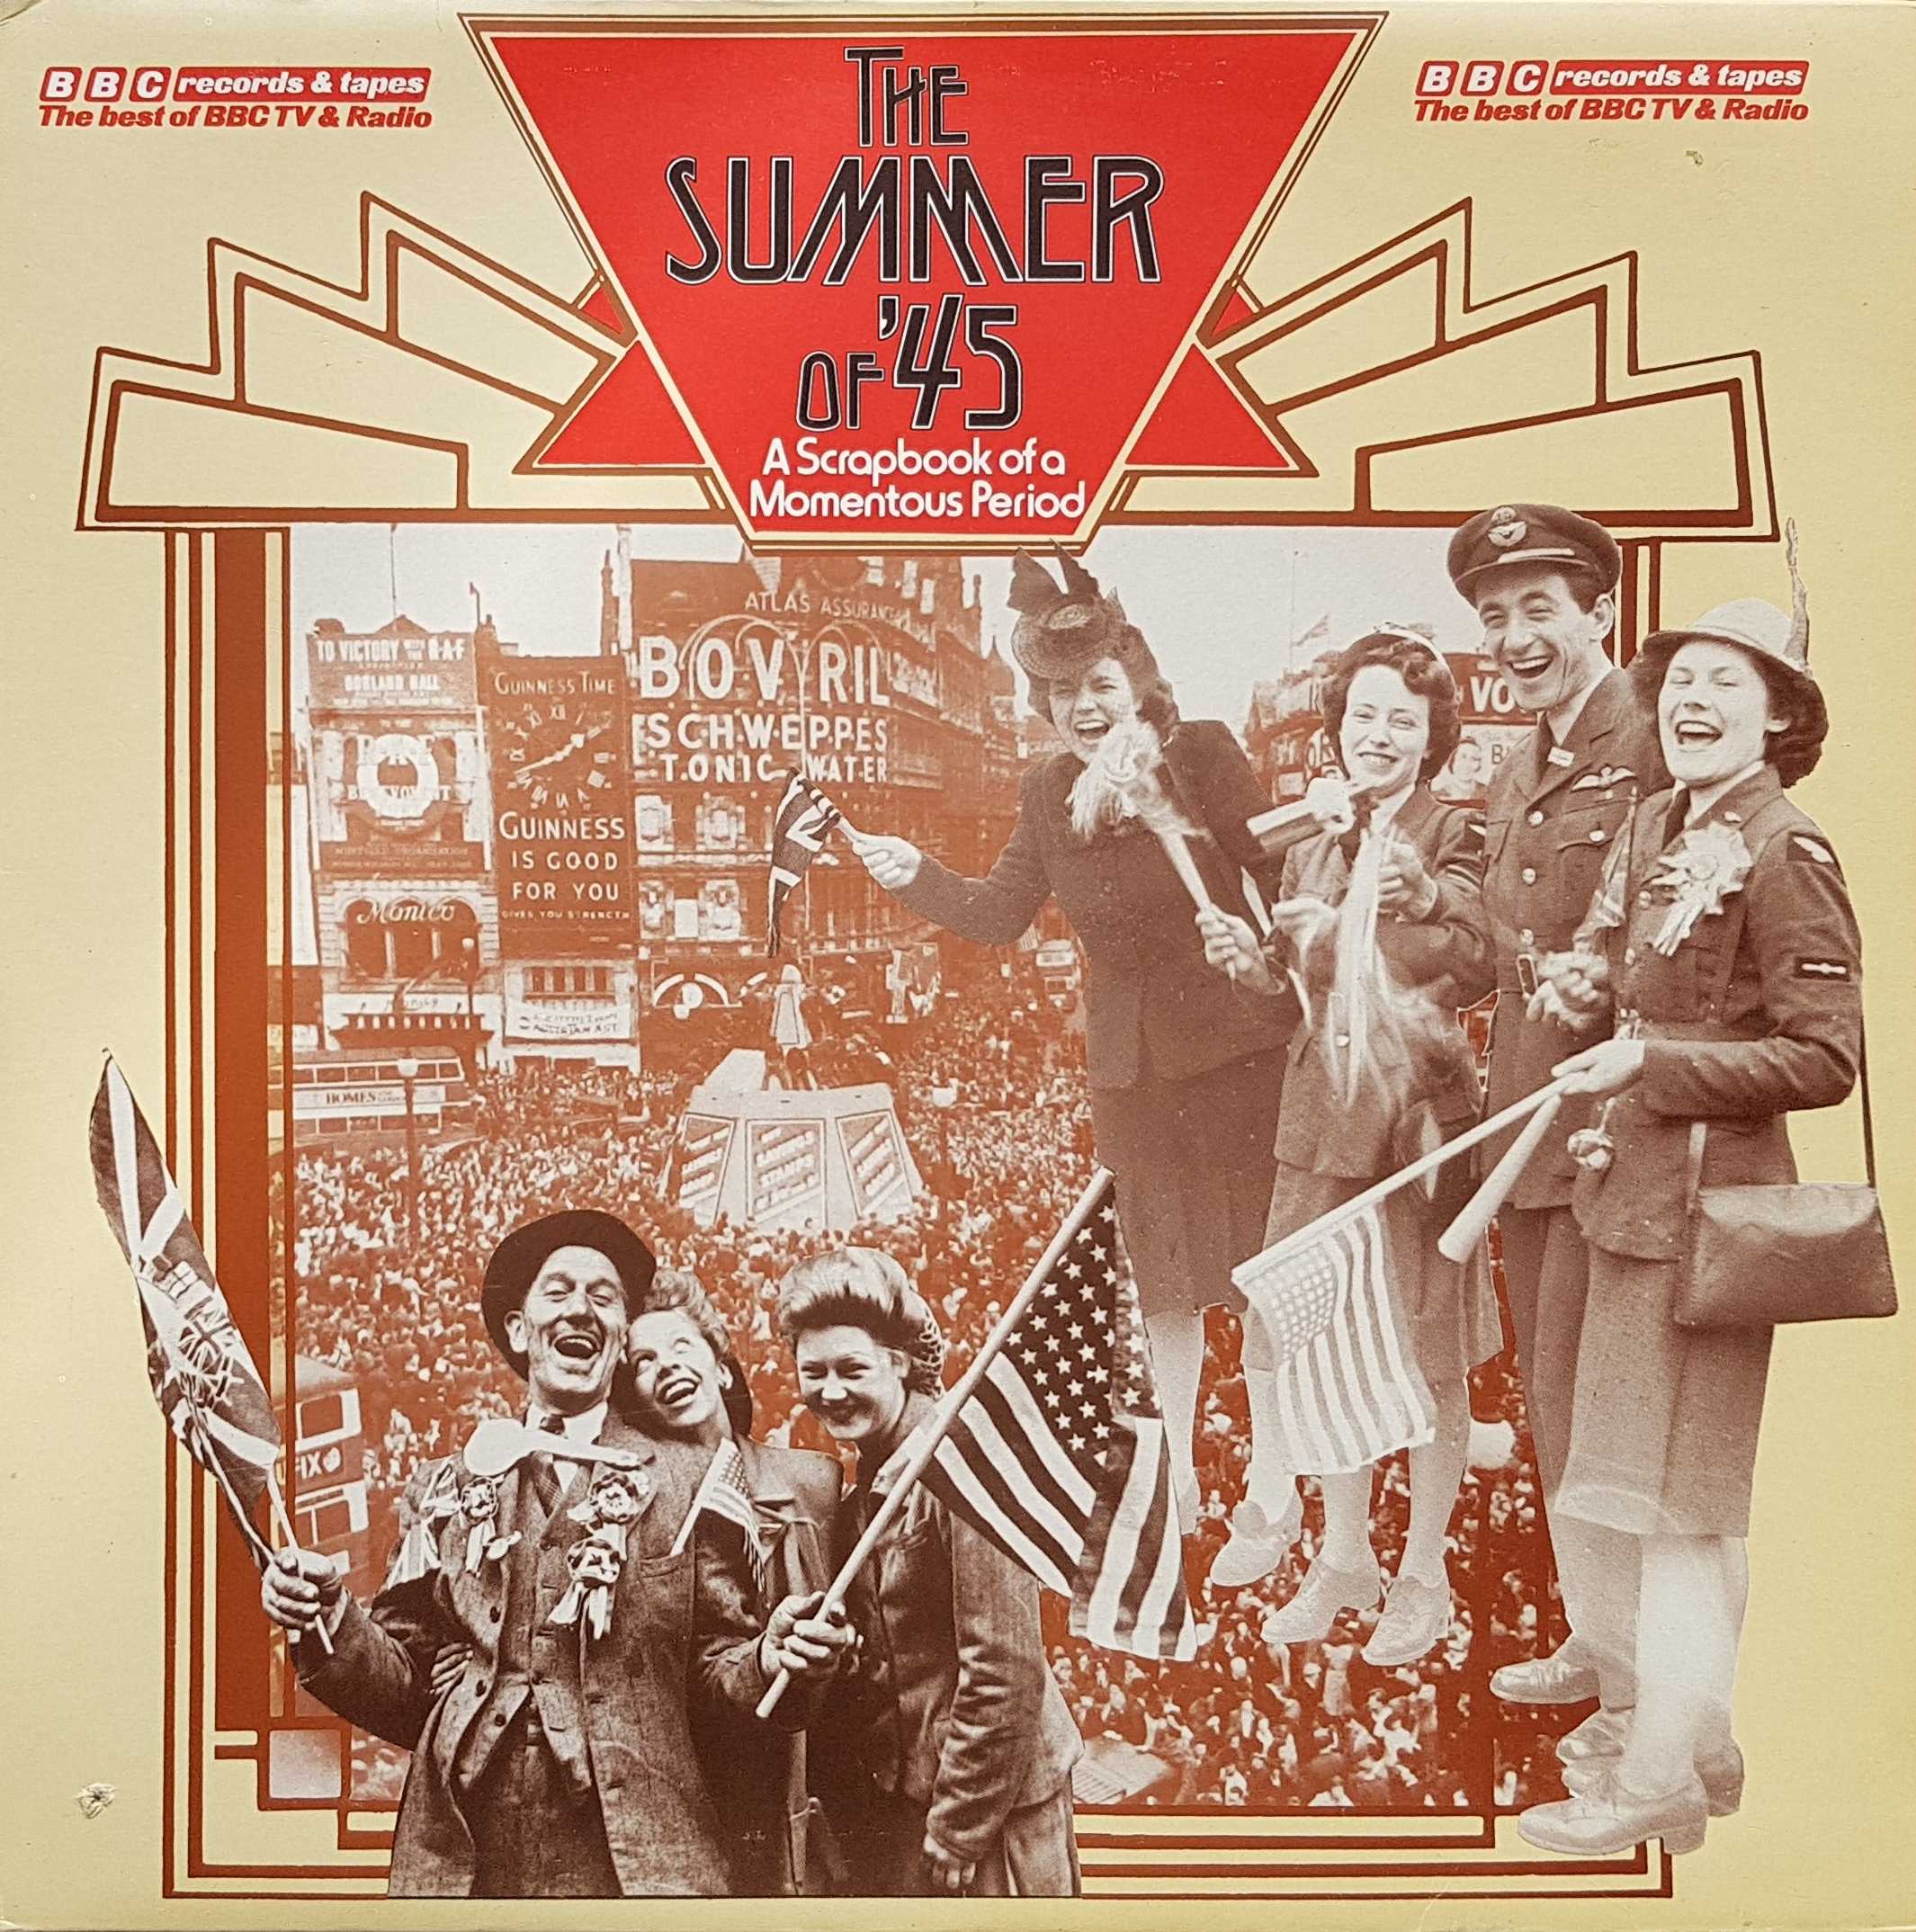 Picture of The Summer Of '45 (A scrapbook of a momentous period) by artist Various from the BBC albums - Records and Tapes library